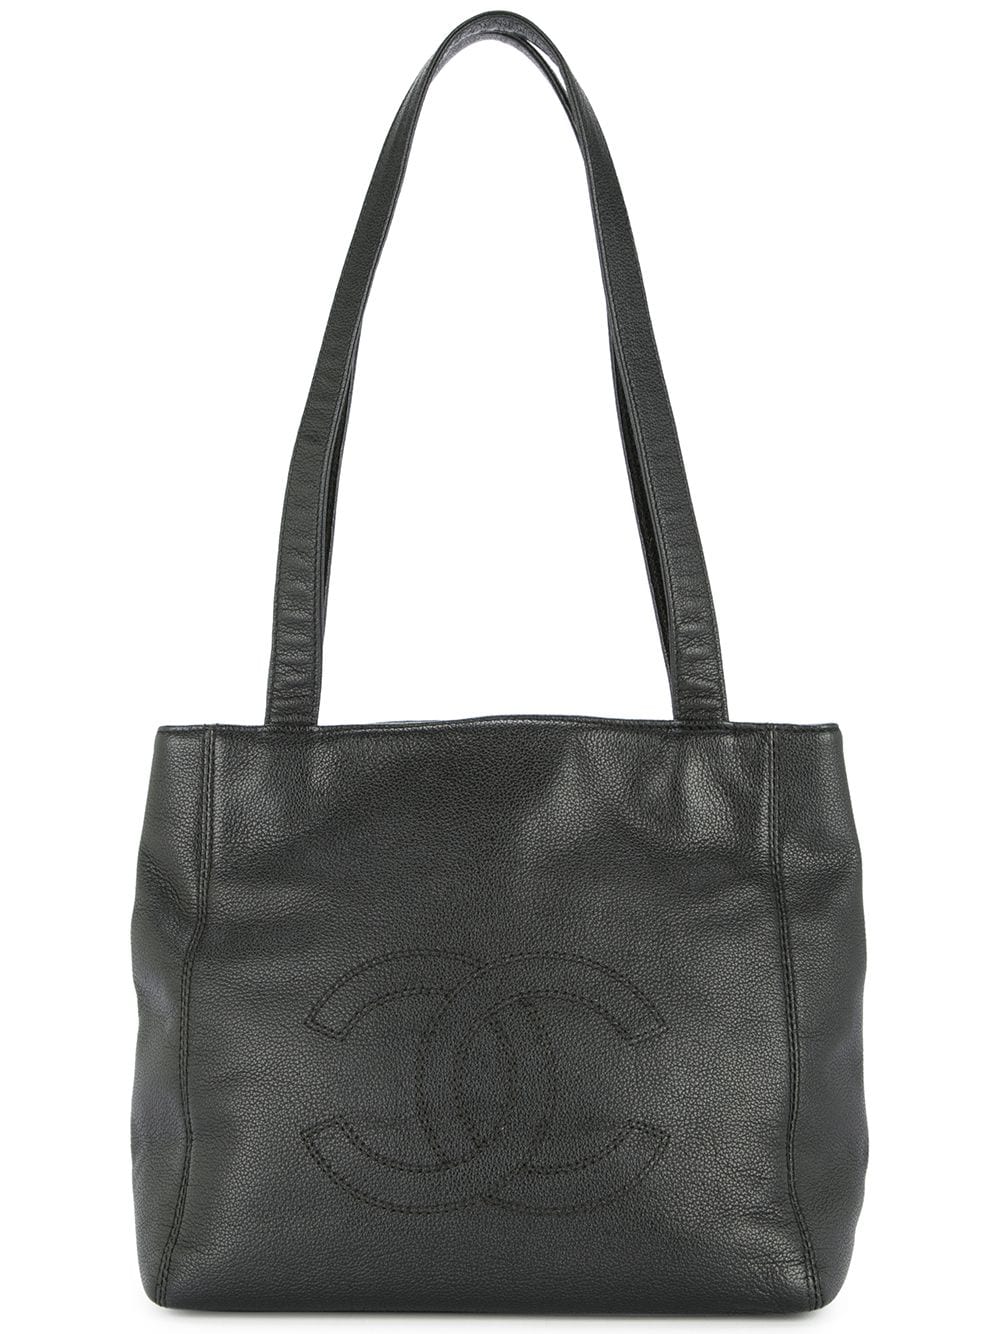 CHANEL Pre-Owned 1997-1999 Chanel CC Shoulder Tote Bag